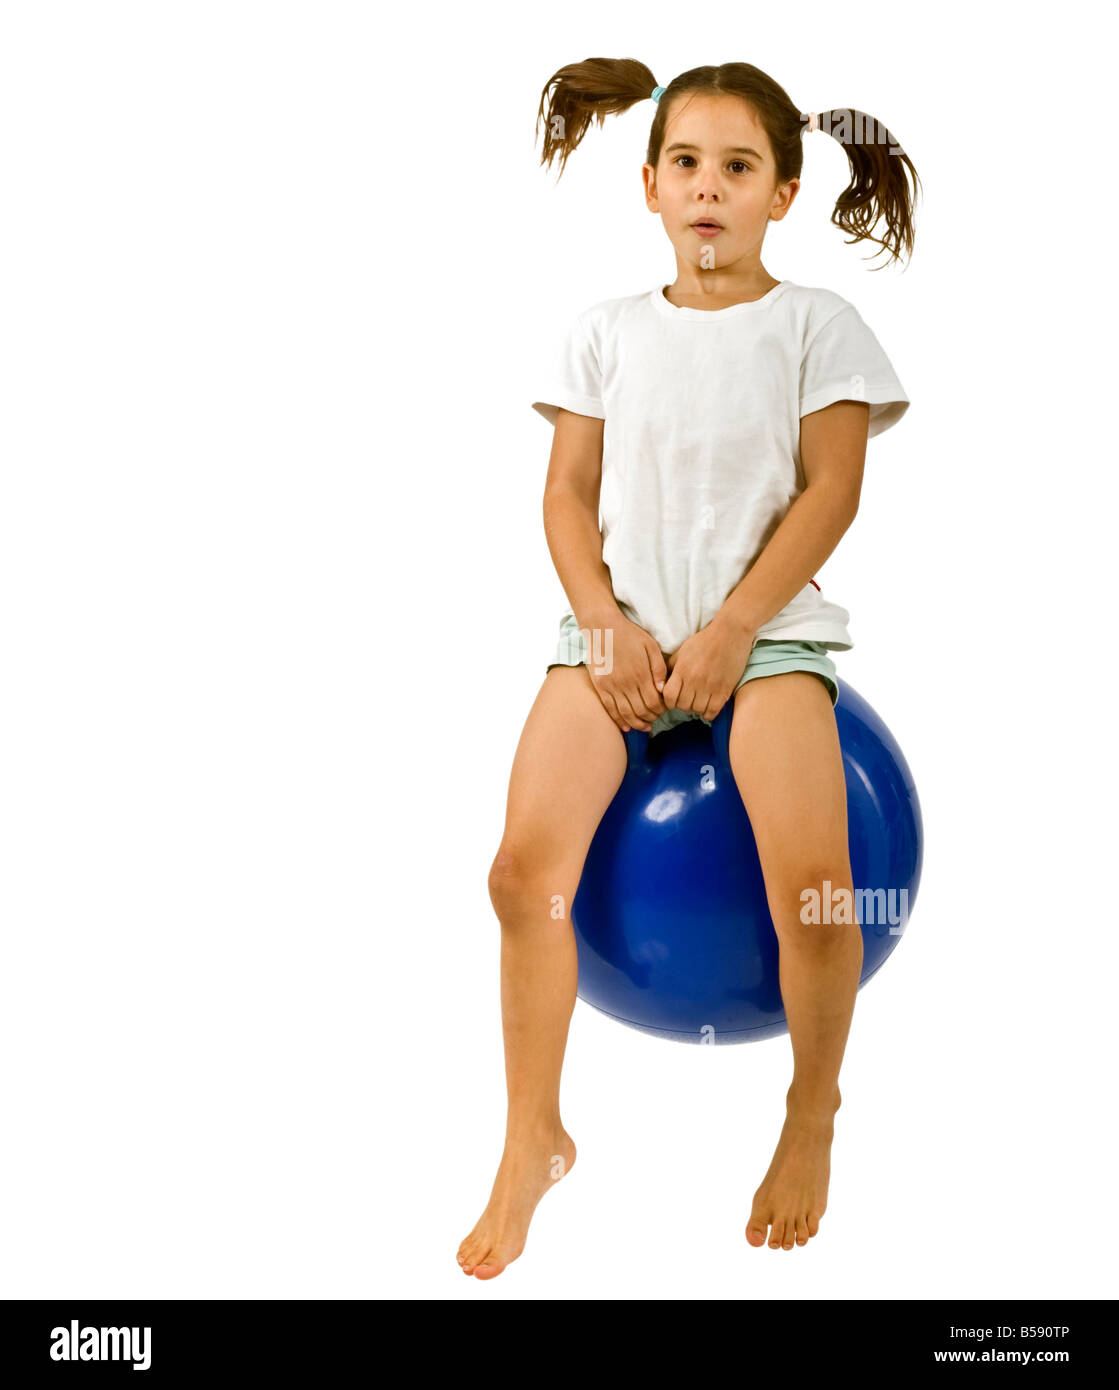 young girl on a blue space hopper isolated on white Stock Photo